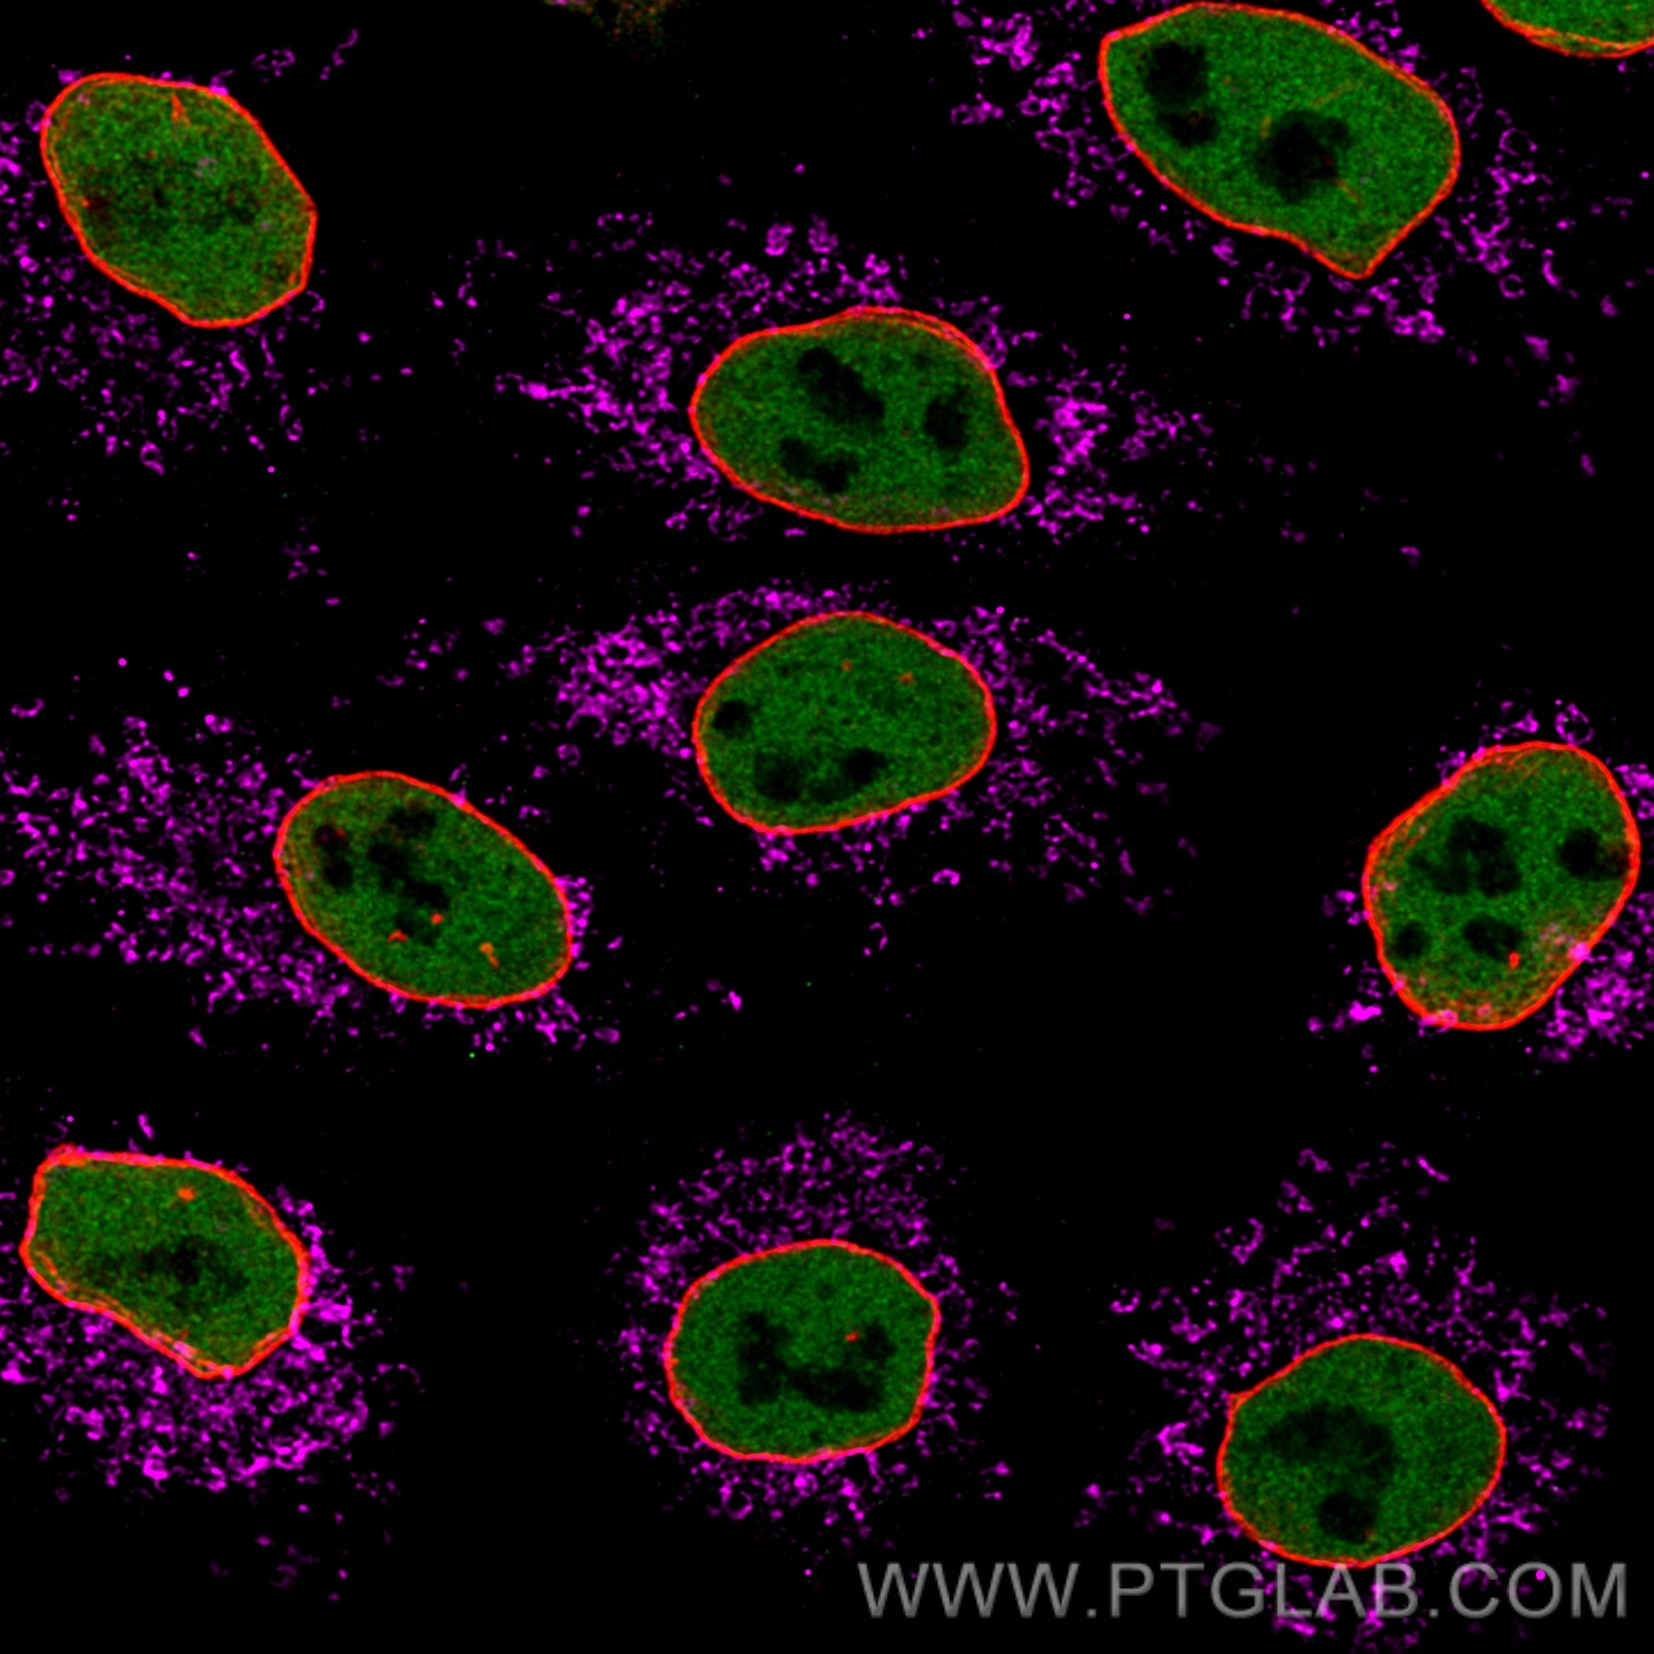 Immunofluorescence of HeLa: PFA-fixed HeLa cells were stained with anti-HDAC2 (676165-1-Ig) labeled with FlexAble CoraLite® Plus 488 Kit (KFA061, green), mouse IgG2b anti-Lamin primary and anti-mouse IgG secondary antibody Alexa Fluor® 568 (red) and anti-Tom20 (66777-1-Ig) labeled with FlexAble ​CoraLite® Plus 647 Kit (KFA063, magenta). Confocal images were acquired with a 100x oil objective and post-processed. Images were recorded at the Core Facility Bioimaging at the Biomedical Center, LMU Munich.